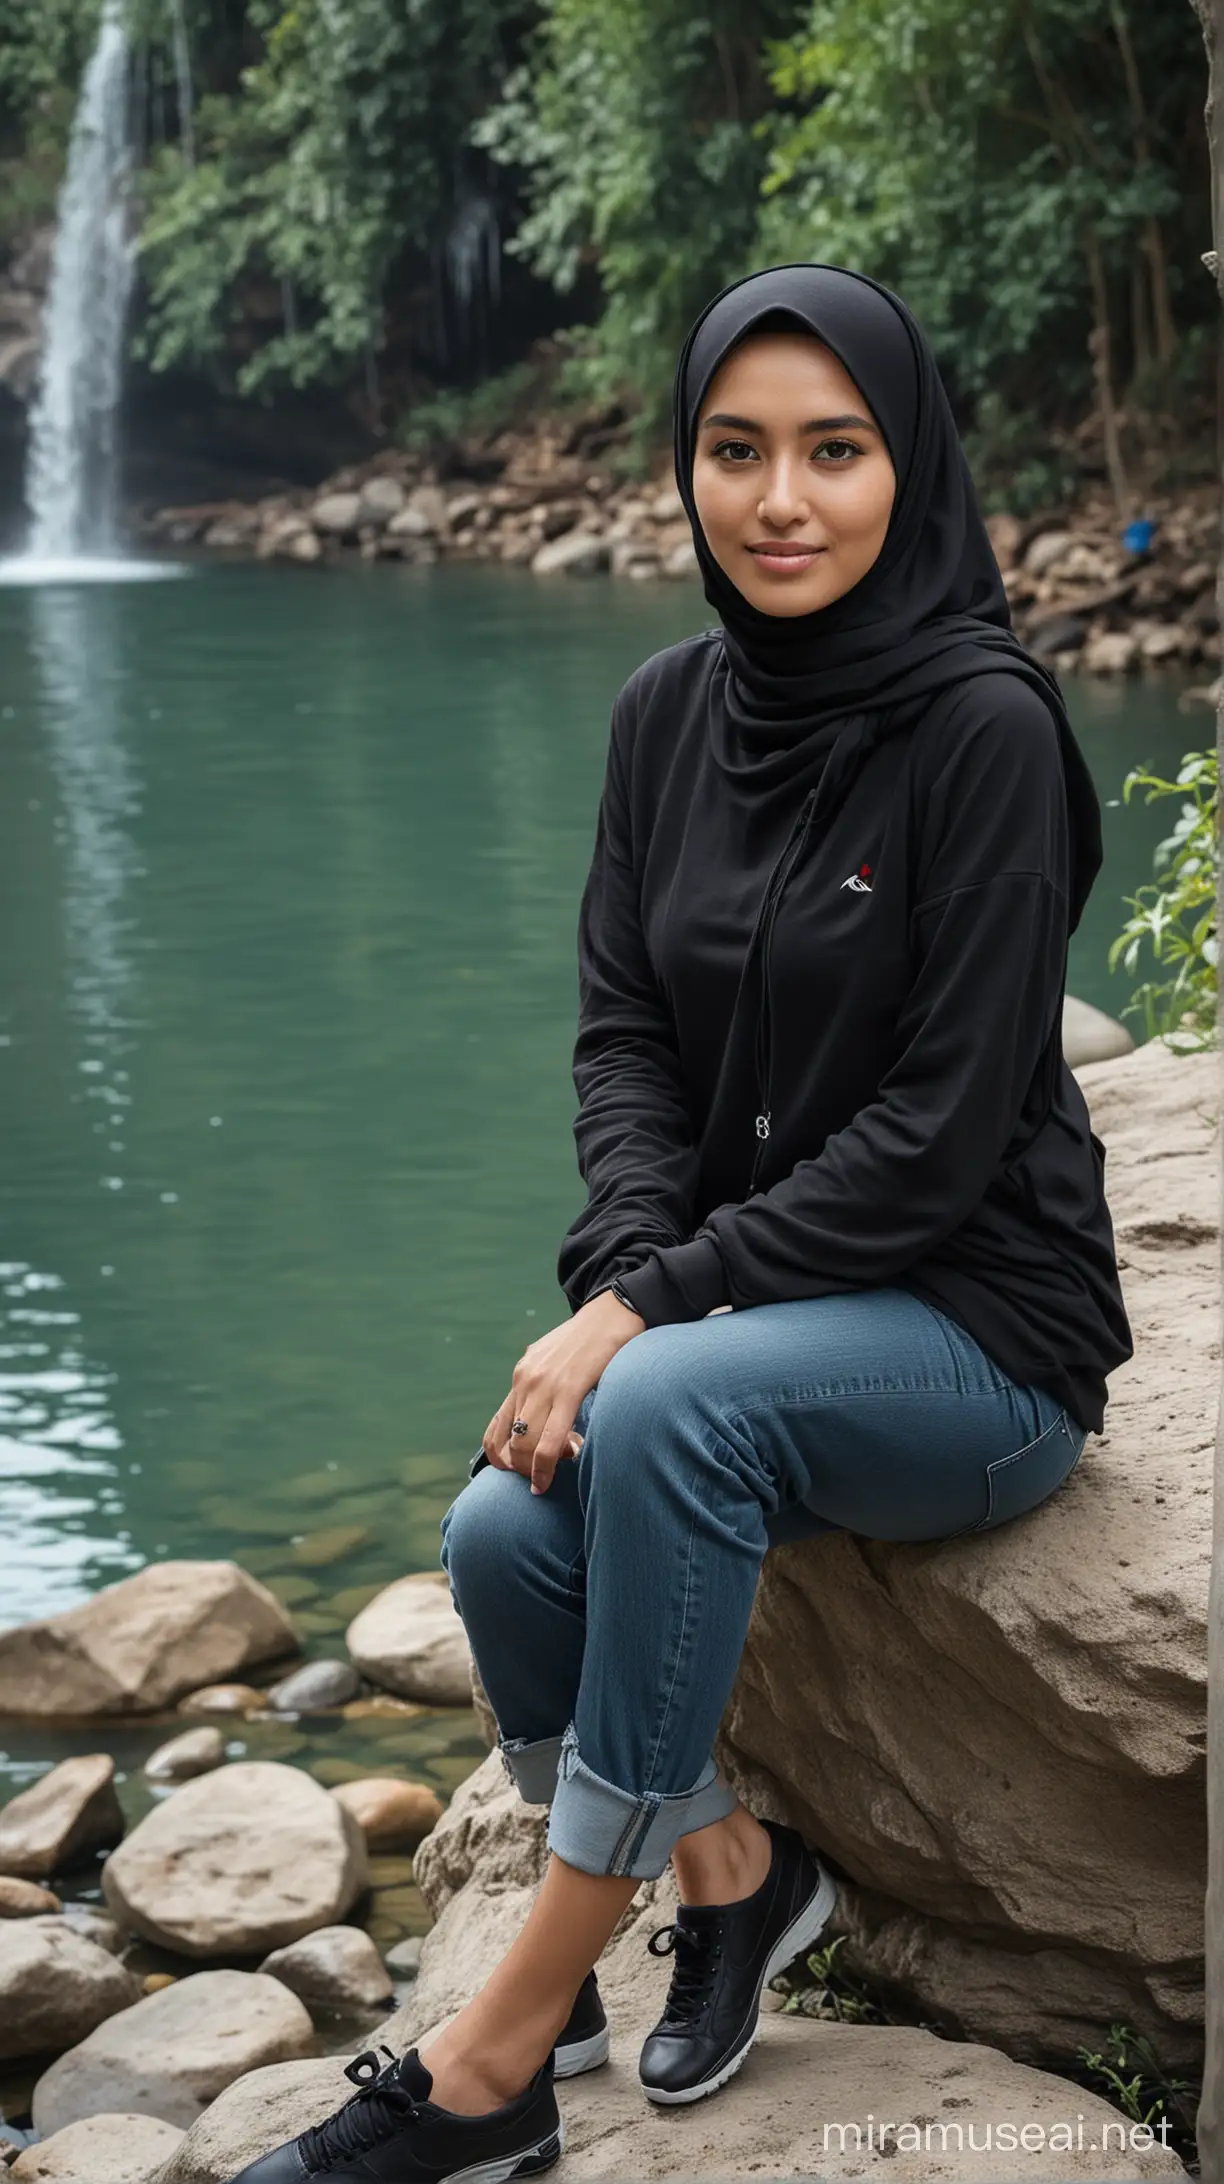 A turkish woman from INDONESIA, aged 35, heigh 160 cm and weight 65 kg,  with a clean and oval face, sitting on a rock, wearing black hijab, black long t-shirt with the "kaza" logo, wearing smartwatch, and jeans, nike shoes.There is a waterfall in the background, a lake, and various flowers.